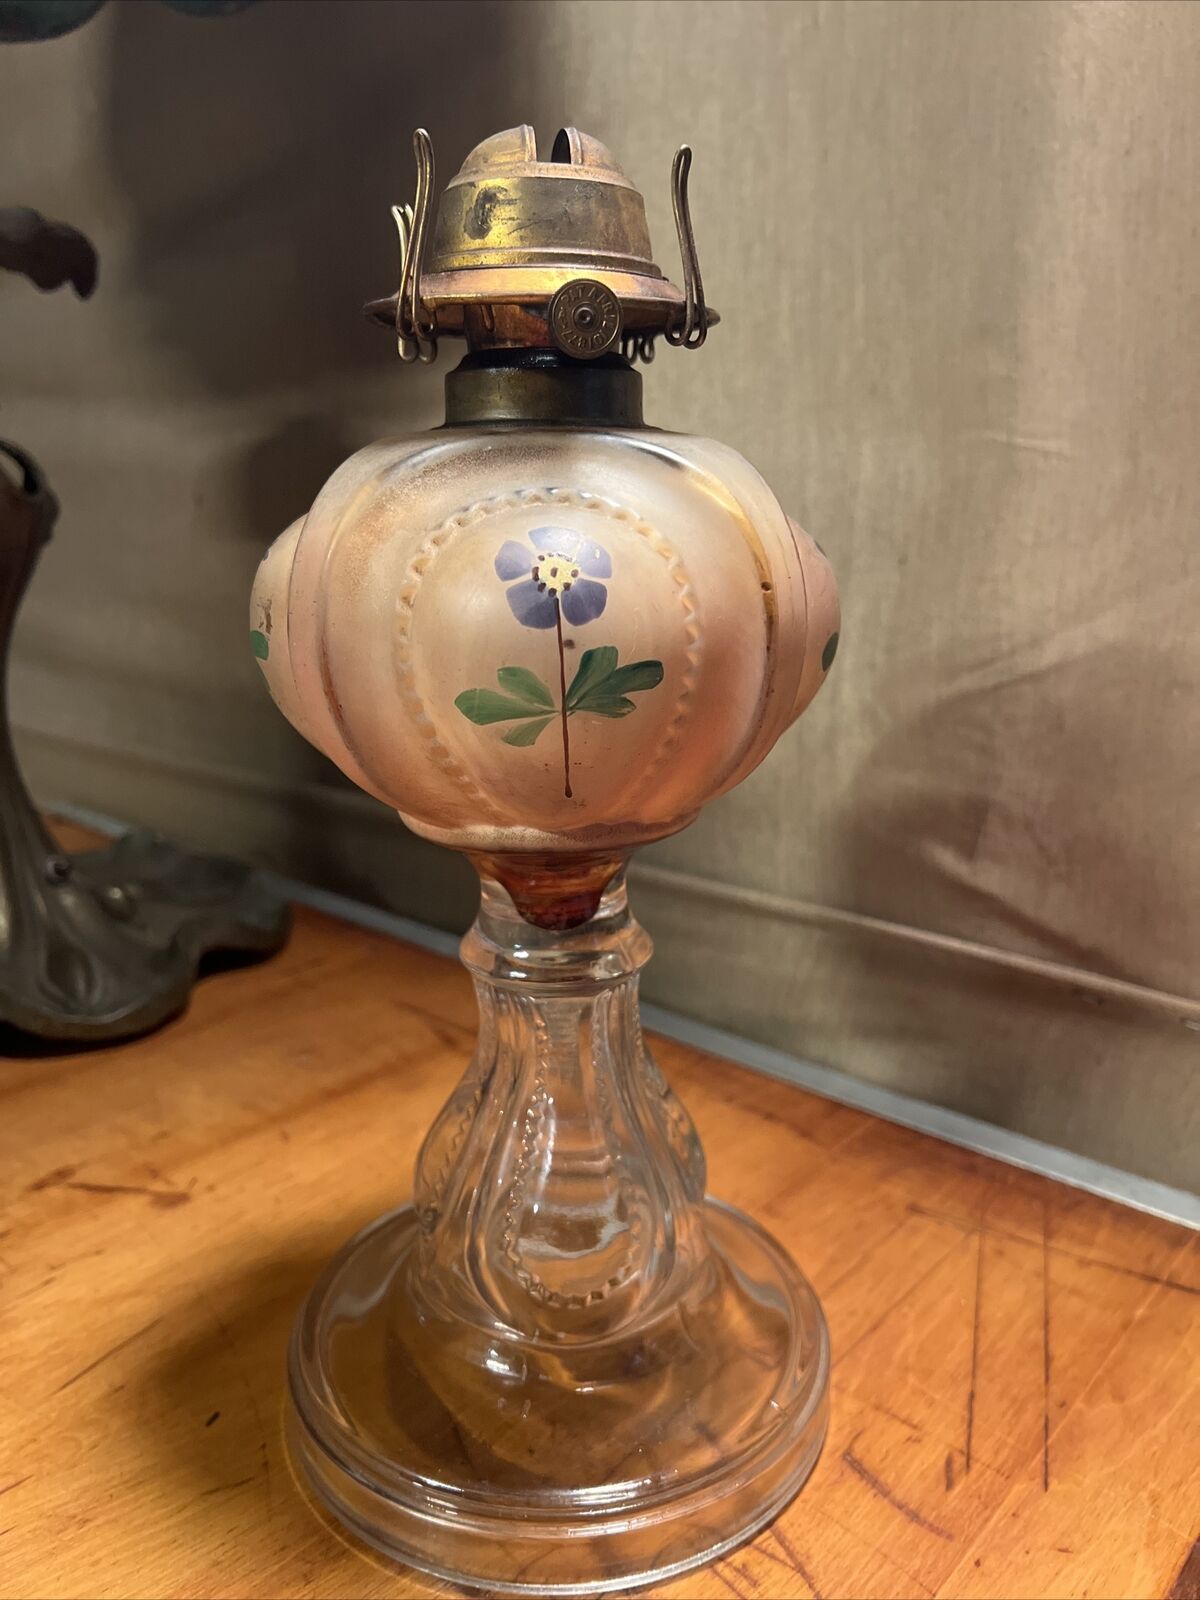 ANTIQUE OIL LAMP GLASS WITH PAINTED FLOWERS 1877 Burner Loop Pattern